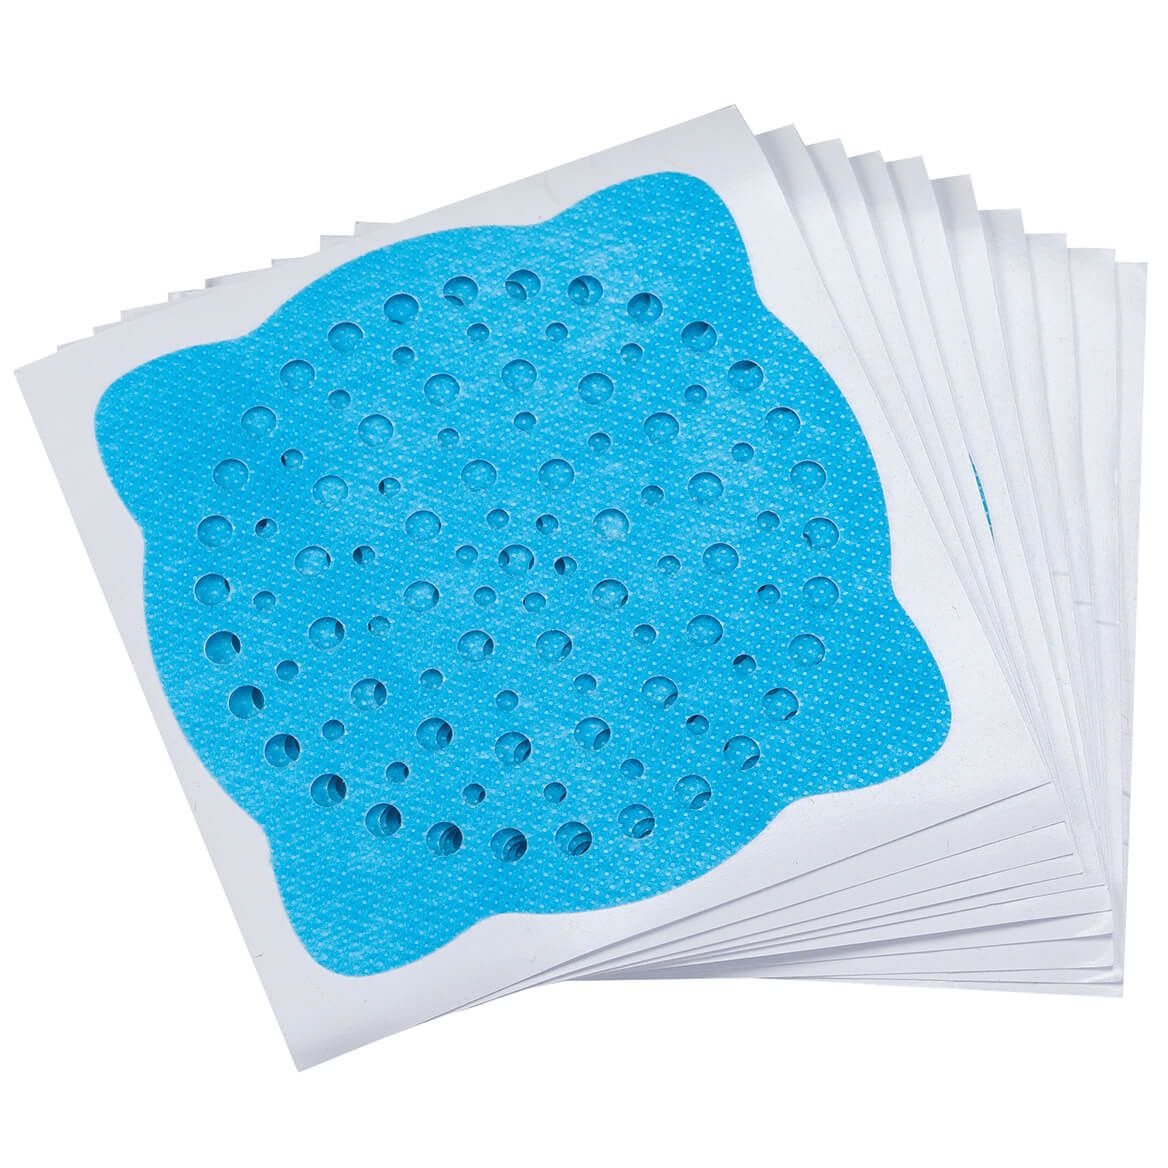 Disposable Drain Covers, Set of 10 + '-' + 375040